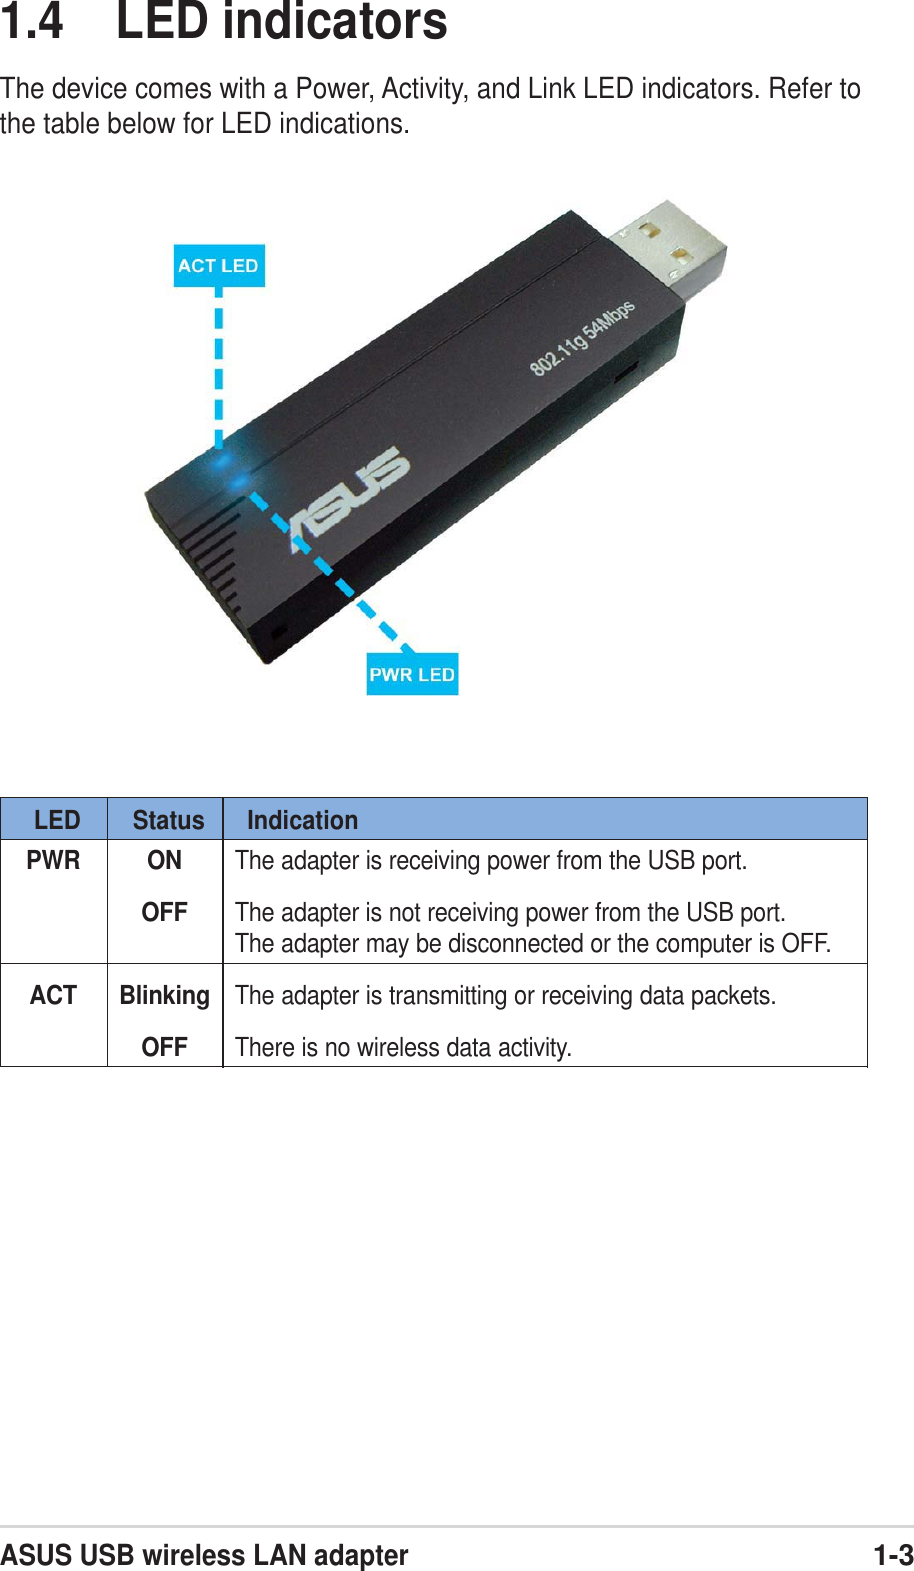 ASUS USB wireless LAN adapter1-31.4 LED indicatorsThe device comes with a Power, Activity, and Link LED indicators. Refer tothe table below for LED indications.LED Status IndicationPWR ON The adapter is receiving power from the USB port.OFF The adapter is not receiving power from the USB port.The adapter may be disconnected or the computer is OFF.ACT Blinking The adapter is transmitting or receiving data packets.OFF There is no wireless data activity.